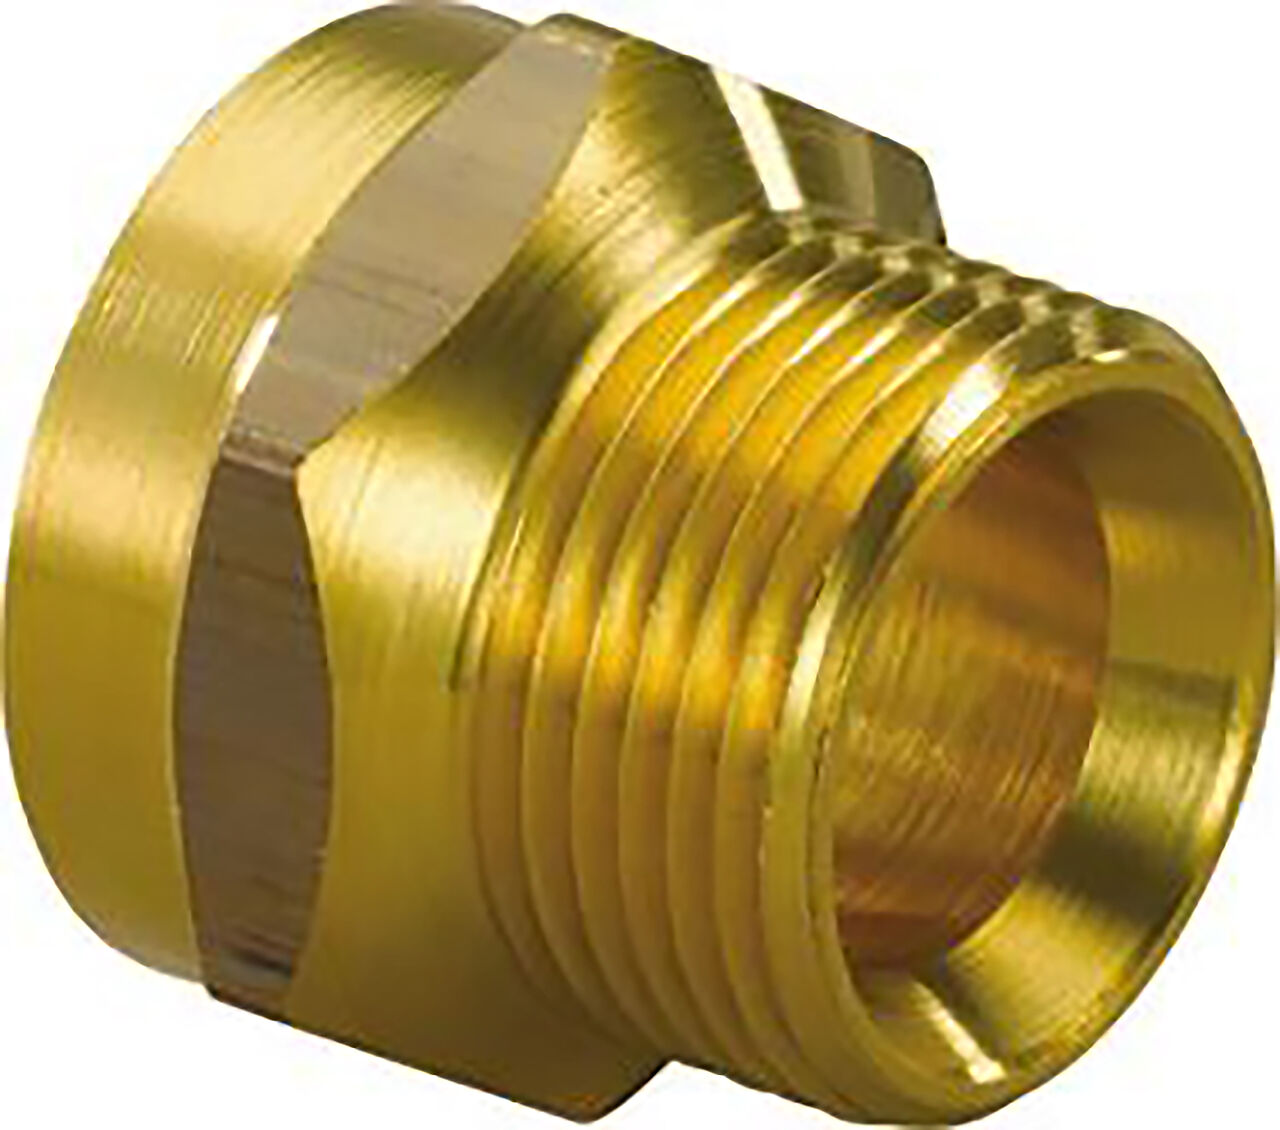 Uponor Overgangsnippel 1/2" x 3/4" for PE-Pex 1